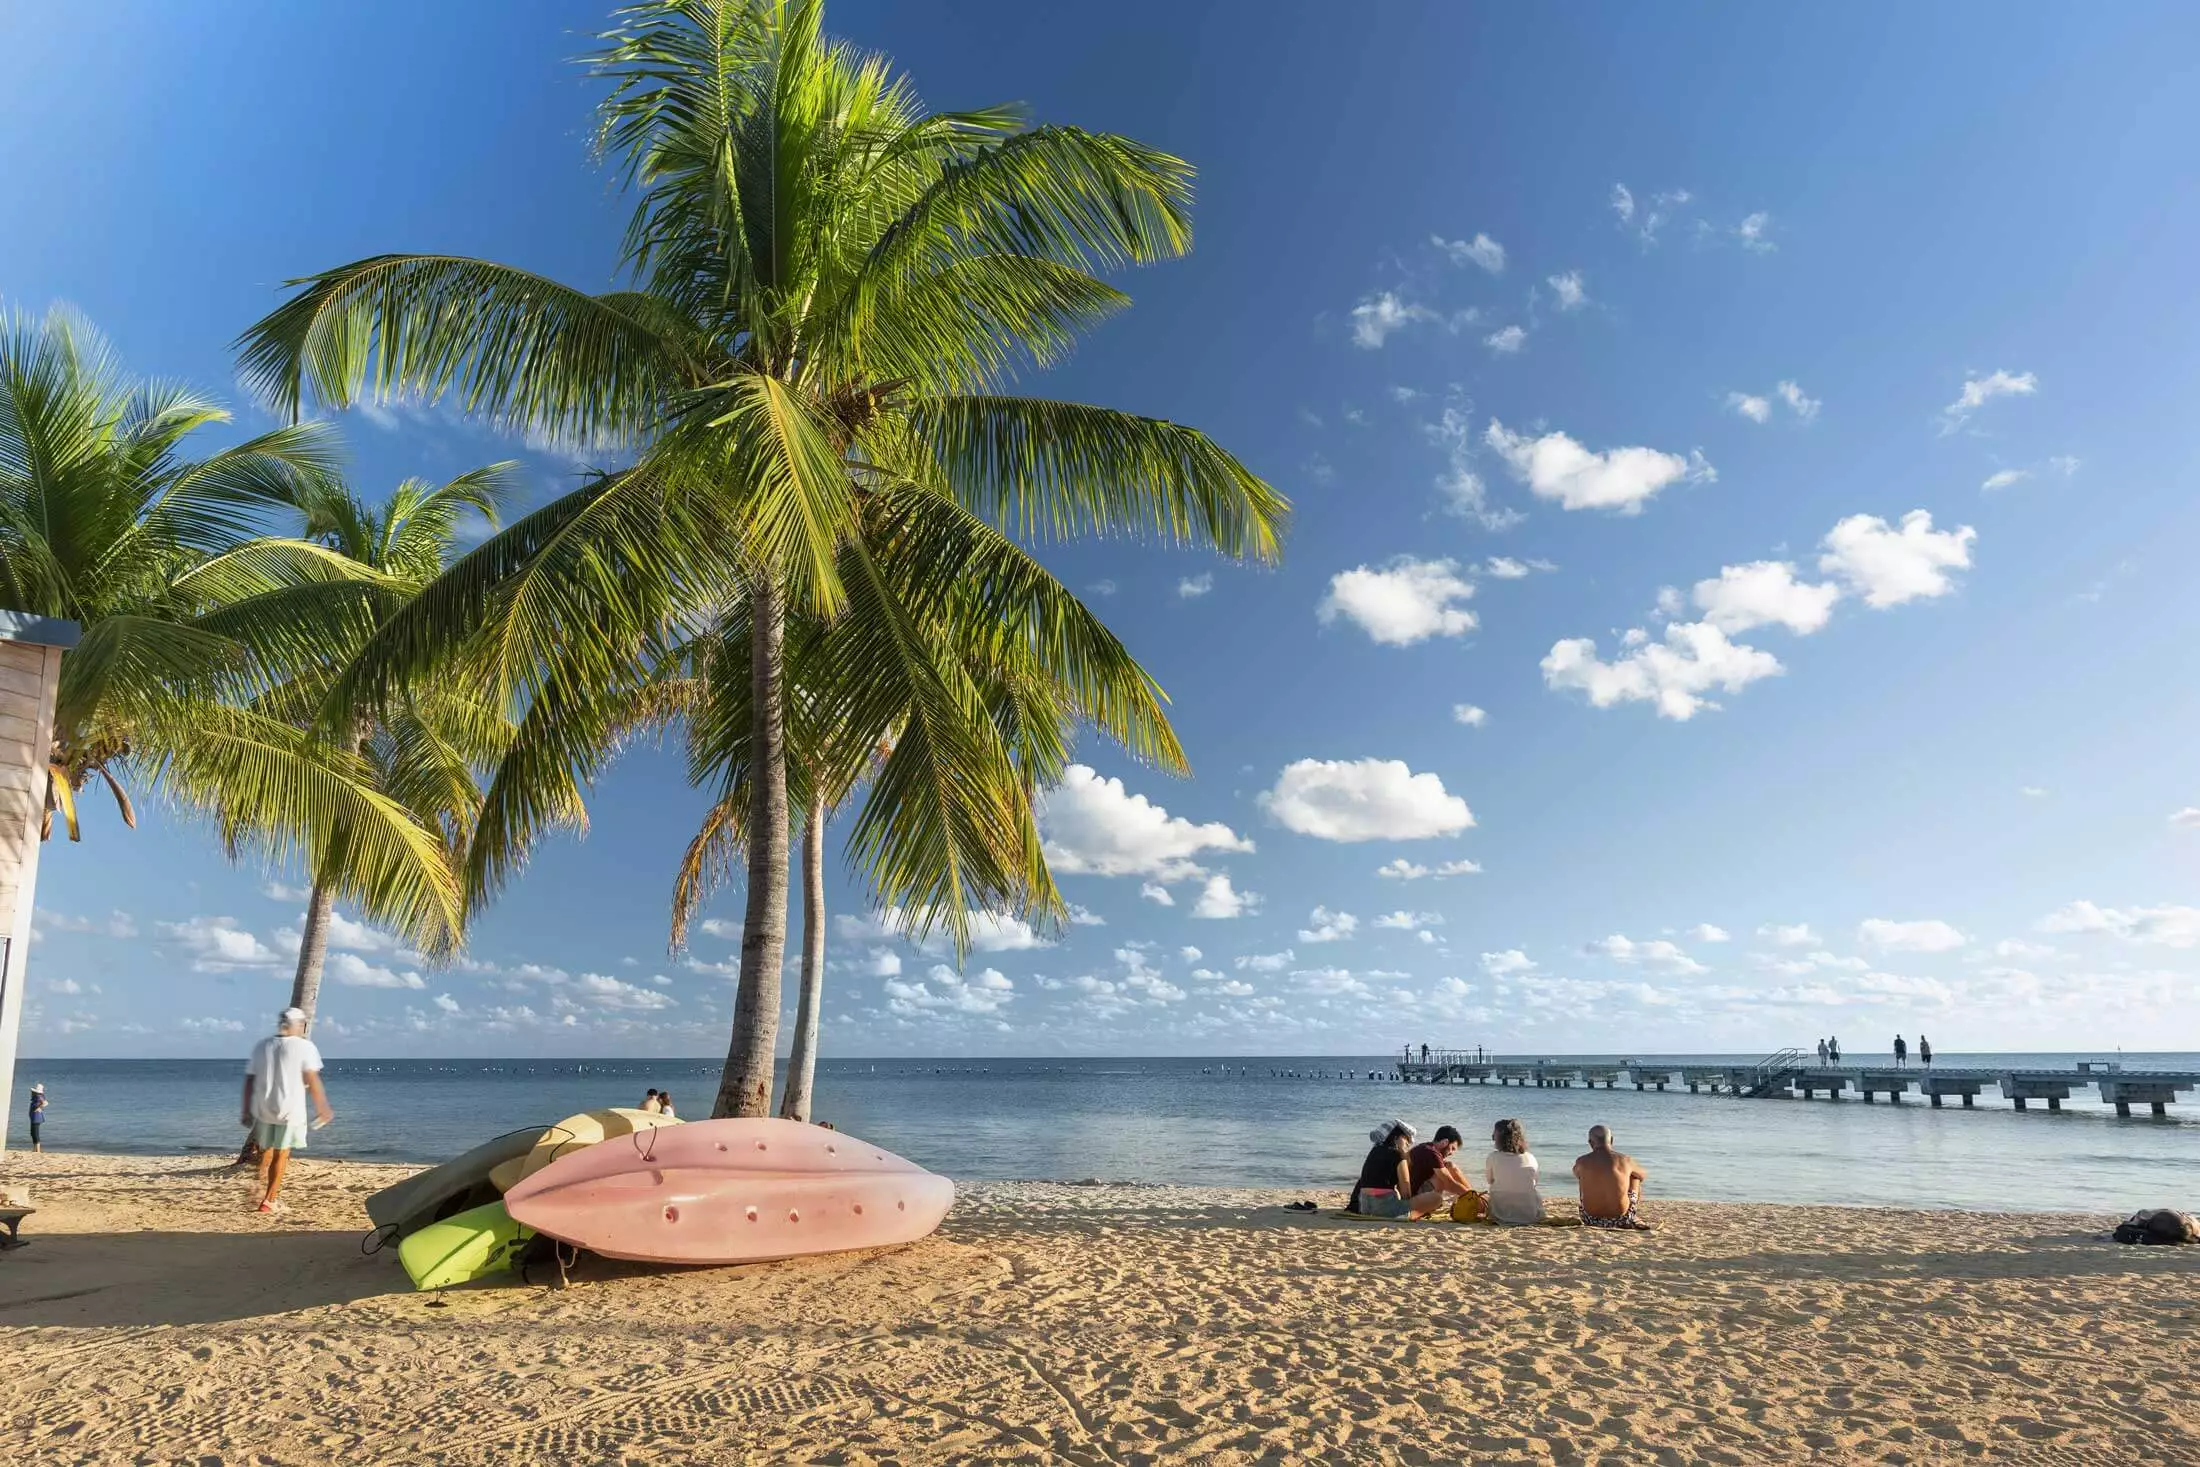 People relaxing on a beach under a palm tree